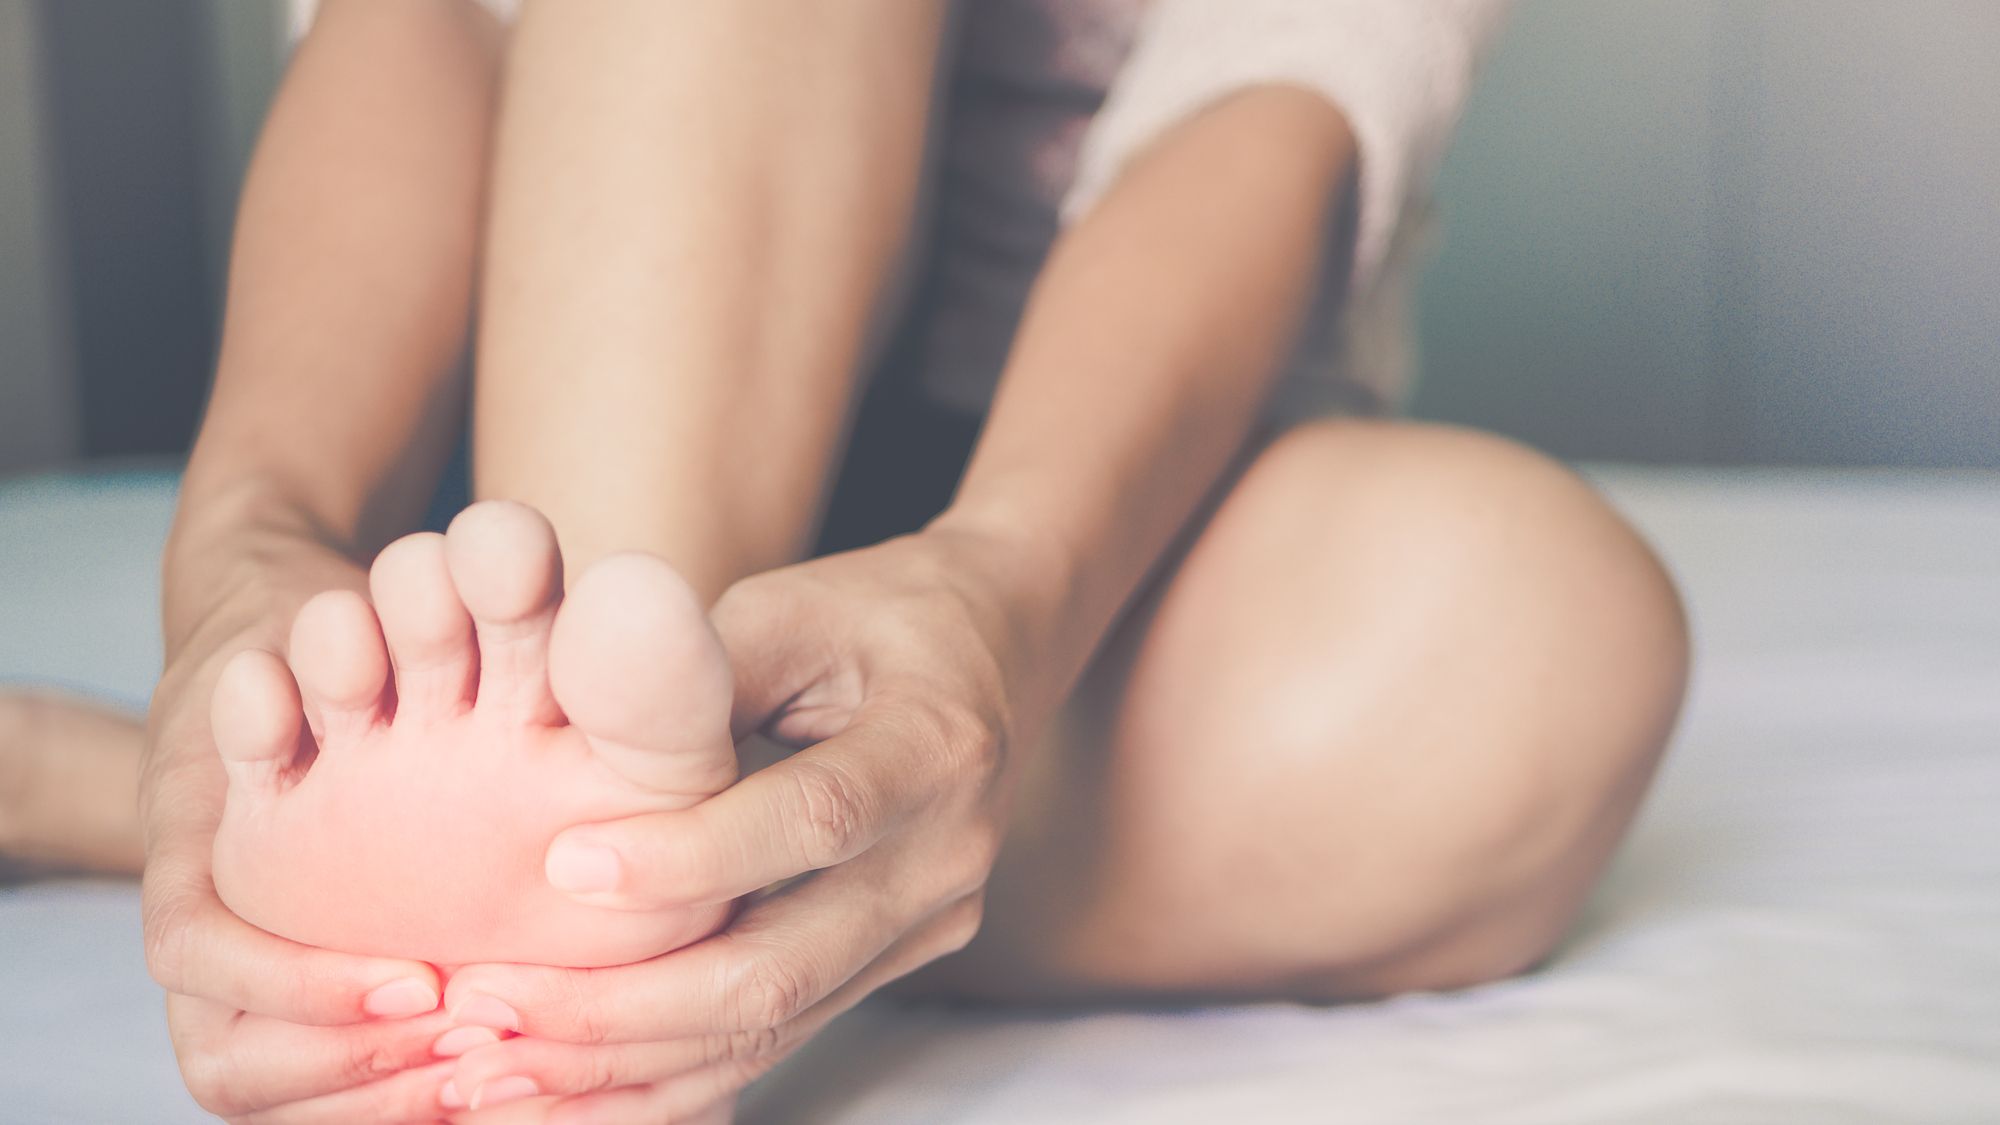 7 Causes of Toe Cramps—and How to Finally Make Them Stop